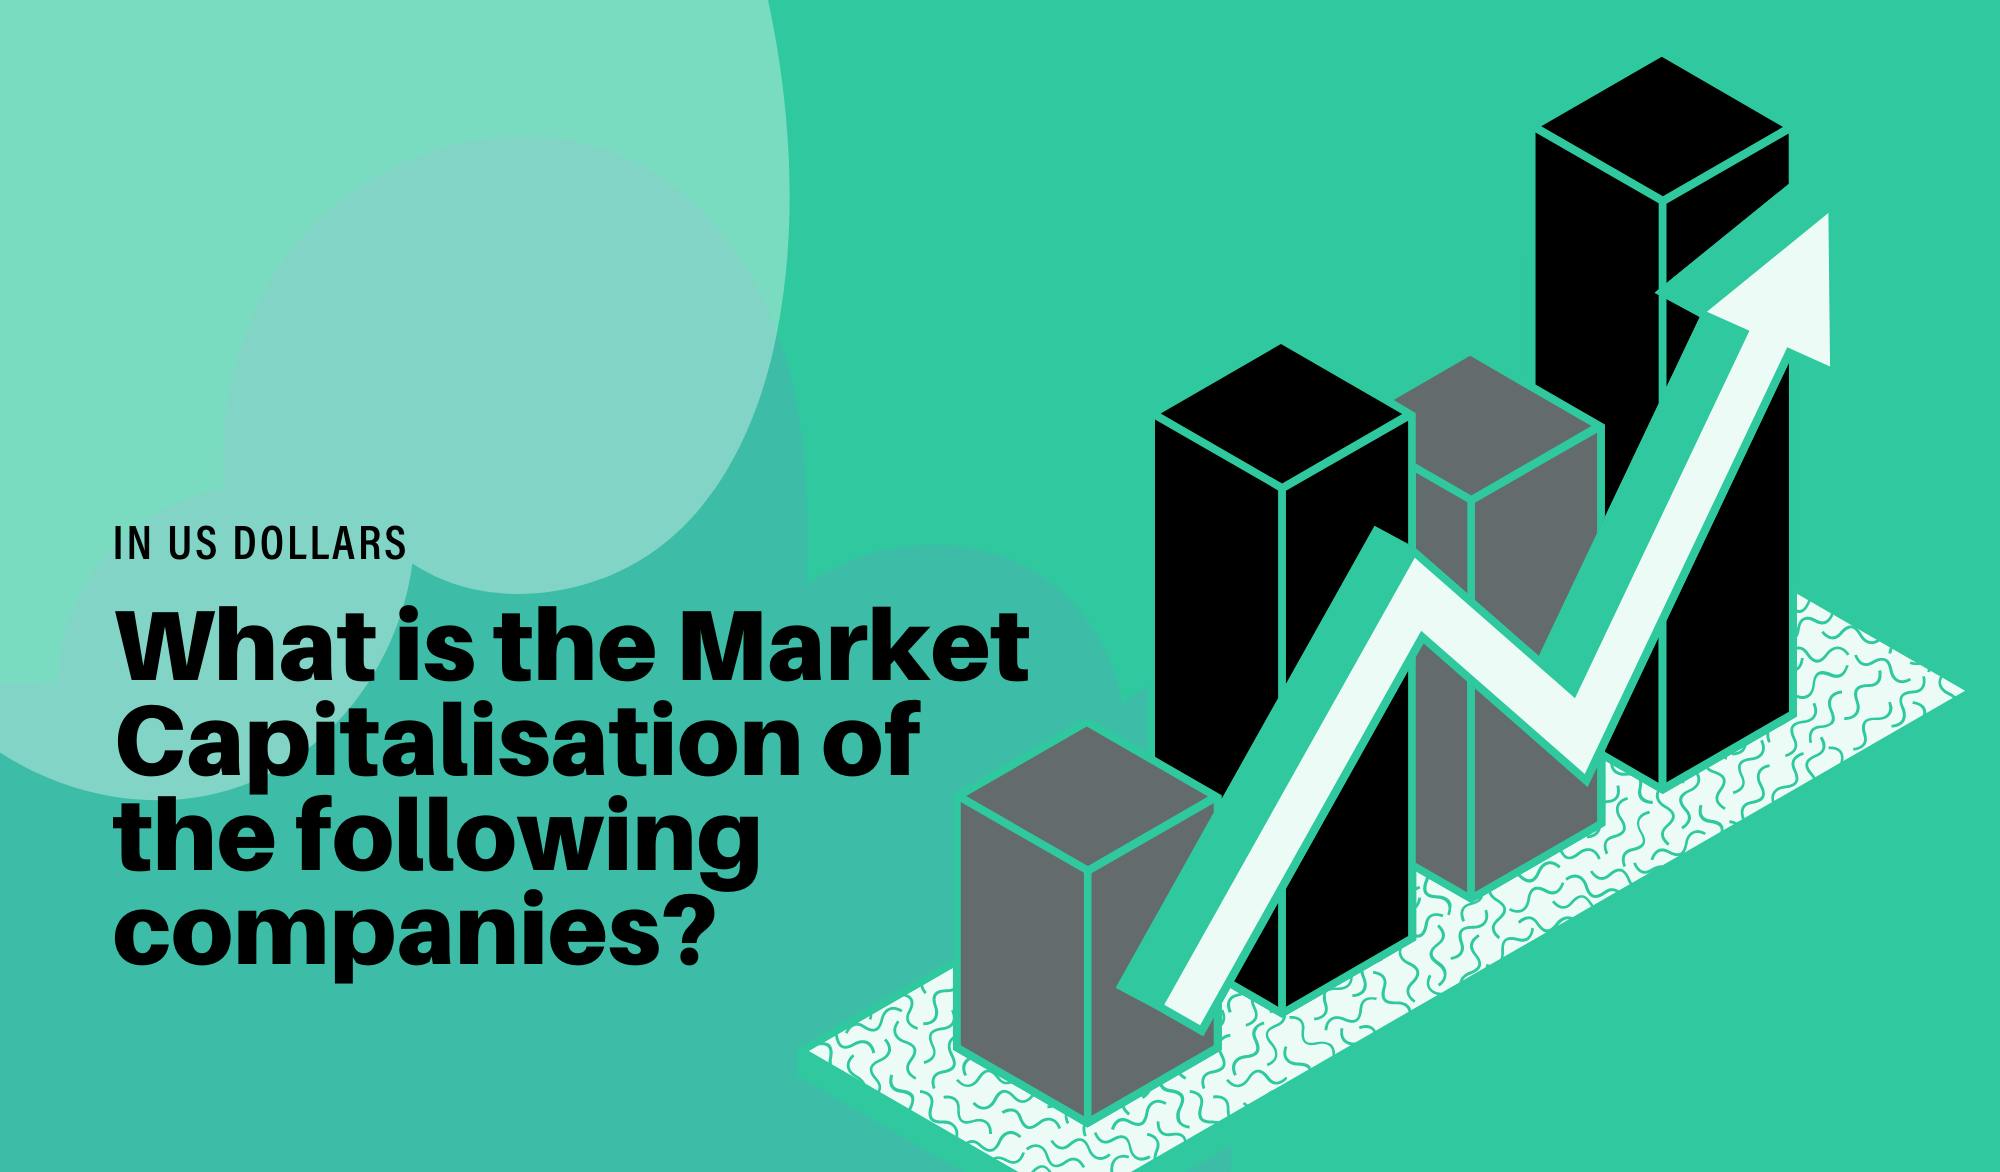 What is the Market Capitalisation of the following companies?